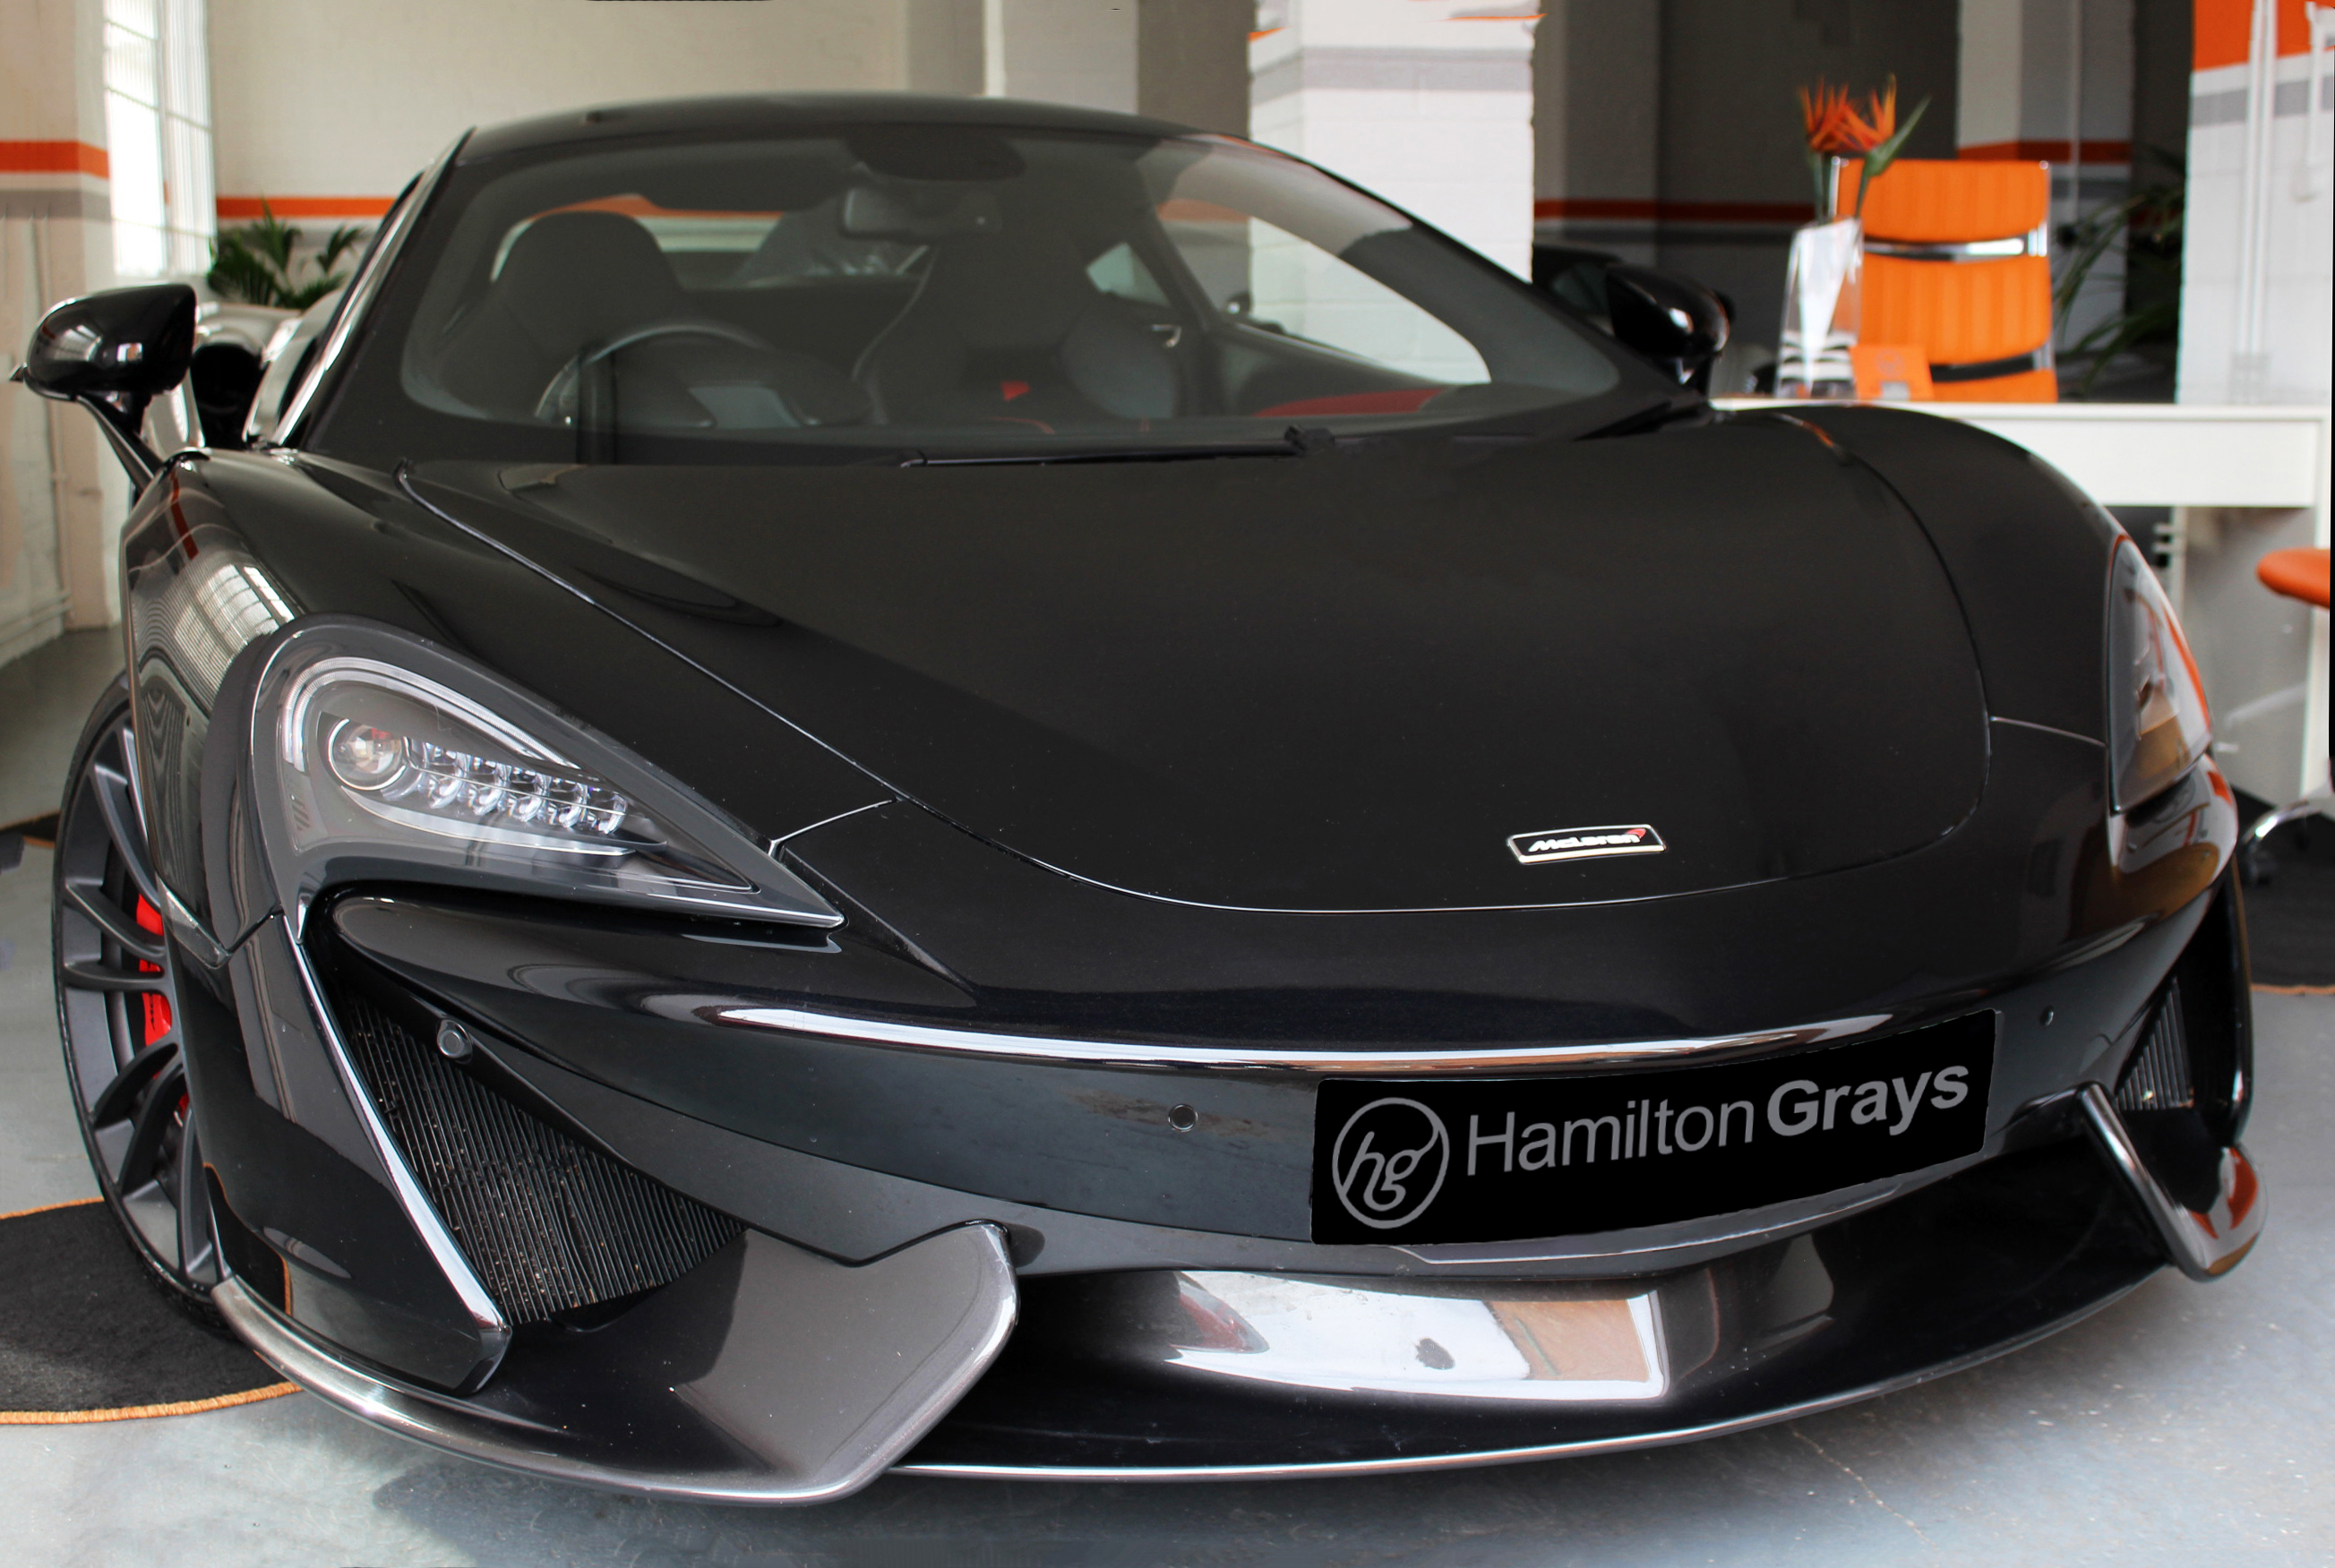 2016 (16) McLaren 570S 3.8T V8 SSG. Onyx Black Metallic with Palladium Grey Interior Piped in Red. 9k.. Lift System Installed.      (SOLD)